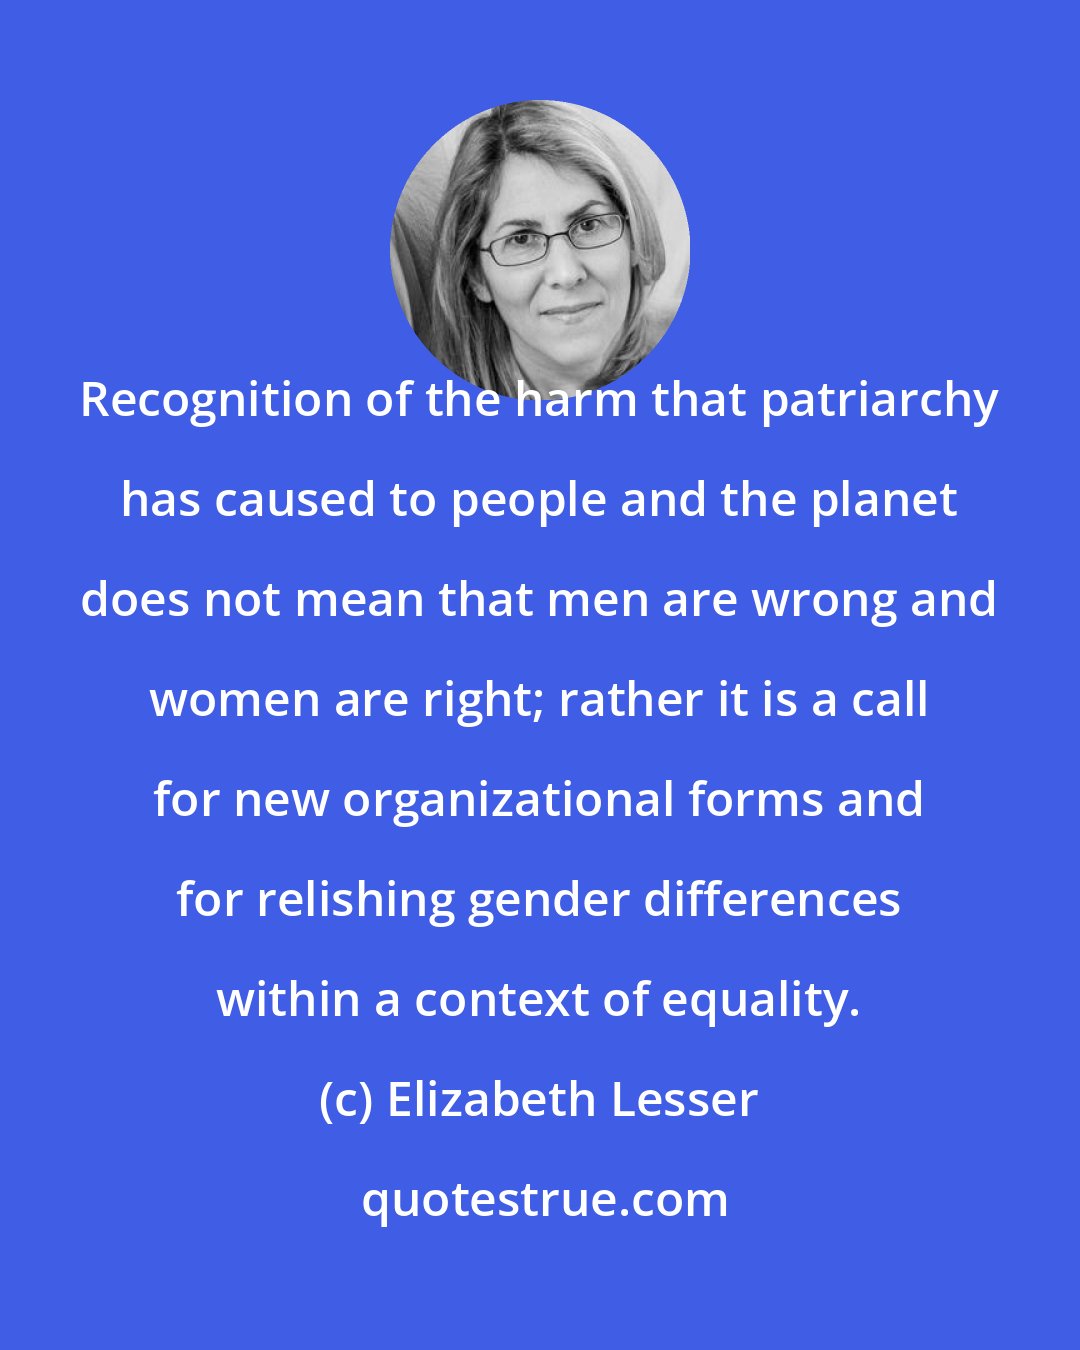 Elizabeth Lesser: Recognition of the harm that patriarchy has caused to people and the planet does not mean that men are wrong and women are right; rather it is a call for new organizational forms and for relishing gender differences within a context of equality.